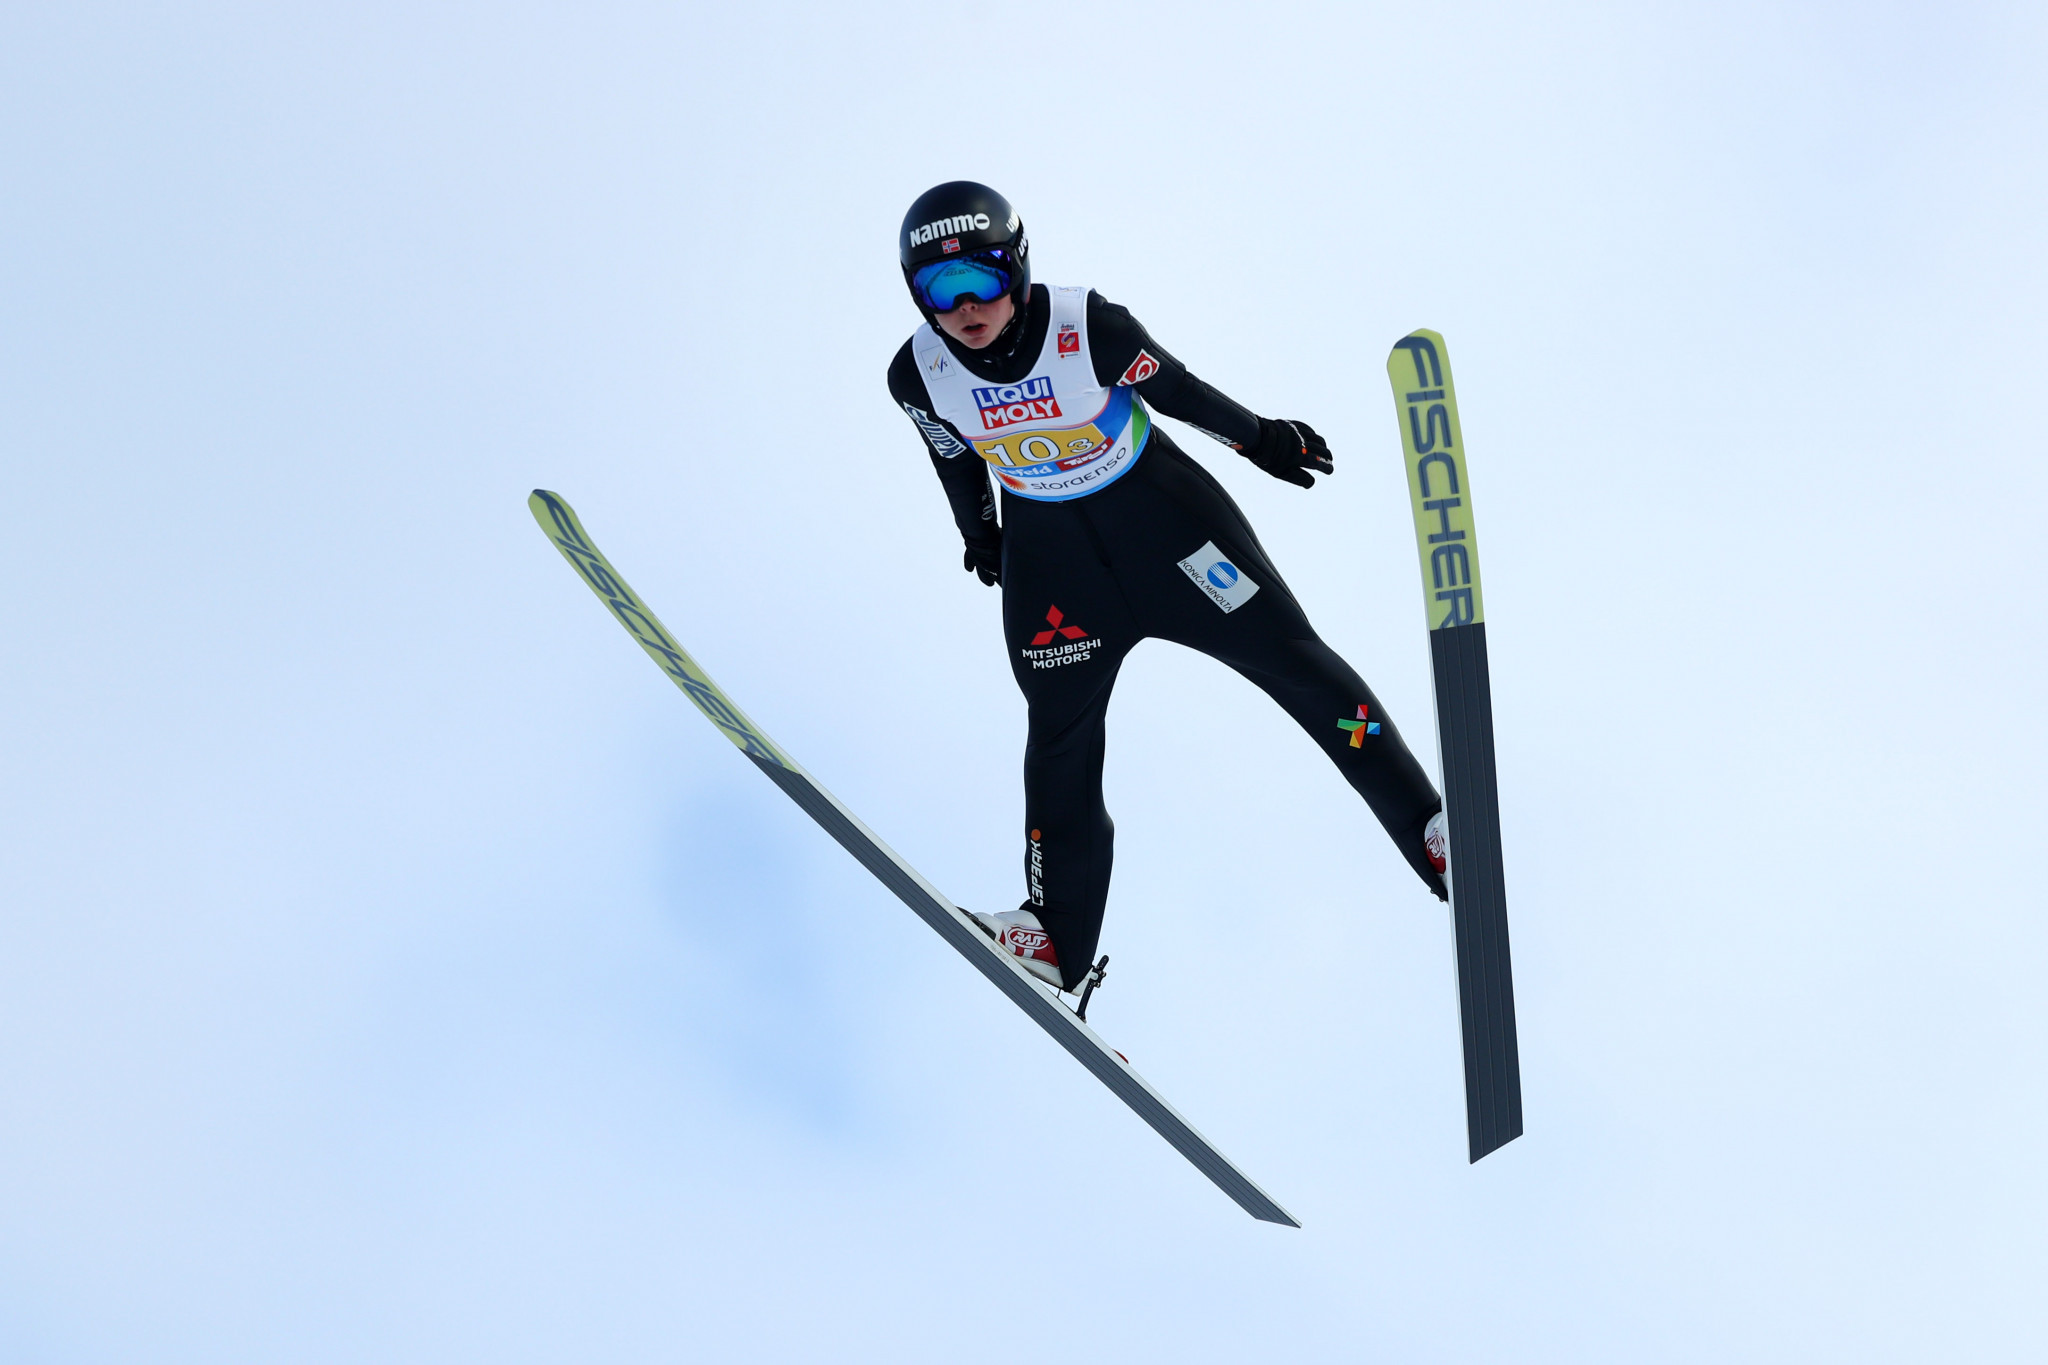 Olympic champion Maren Lundby will aim to top the FIS Ski Jumping World Cup podium again ©Getty Images